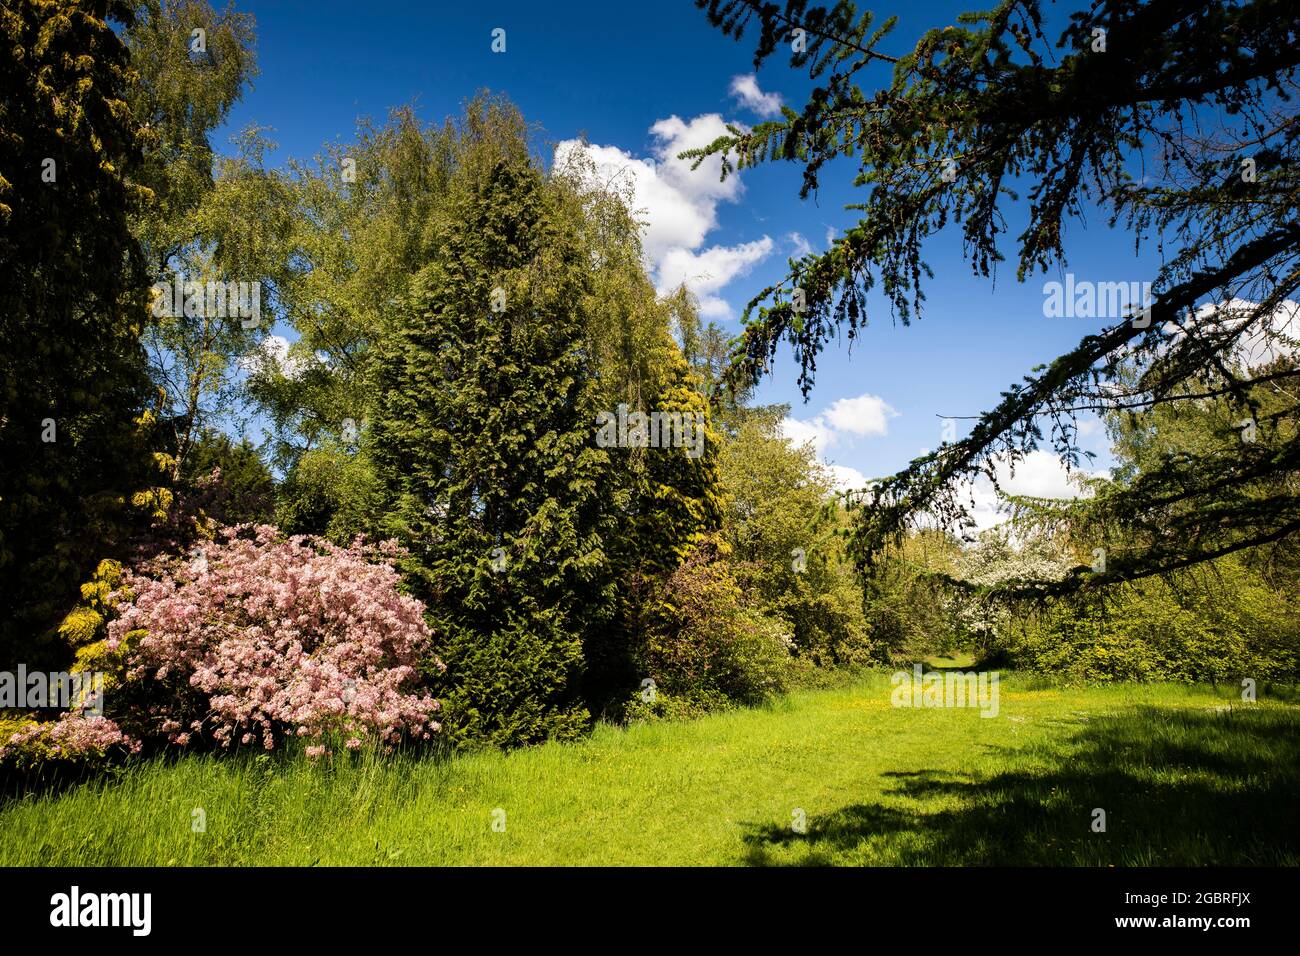 UK, England, Cheshire, Goostrey, University of Manchester, Jodrell Bank, arboretum, early summer trees in blossom Stock Photo